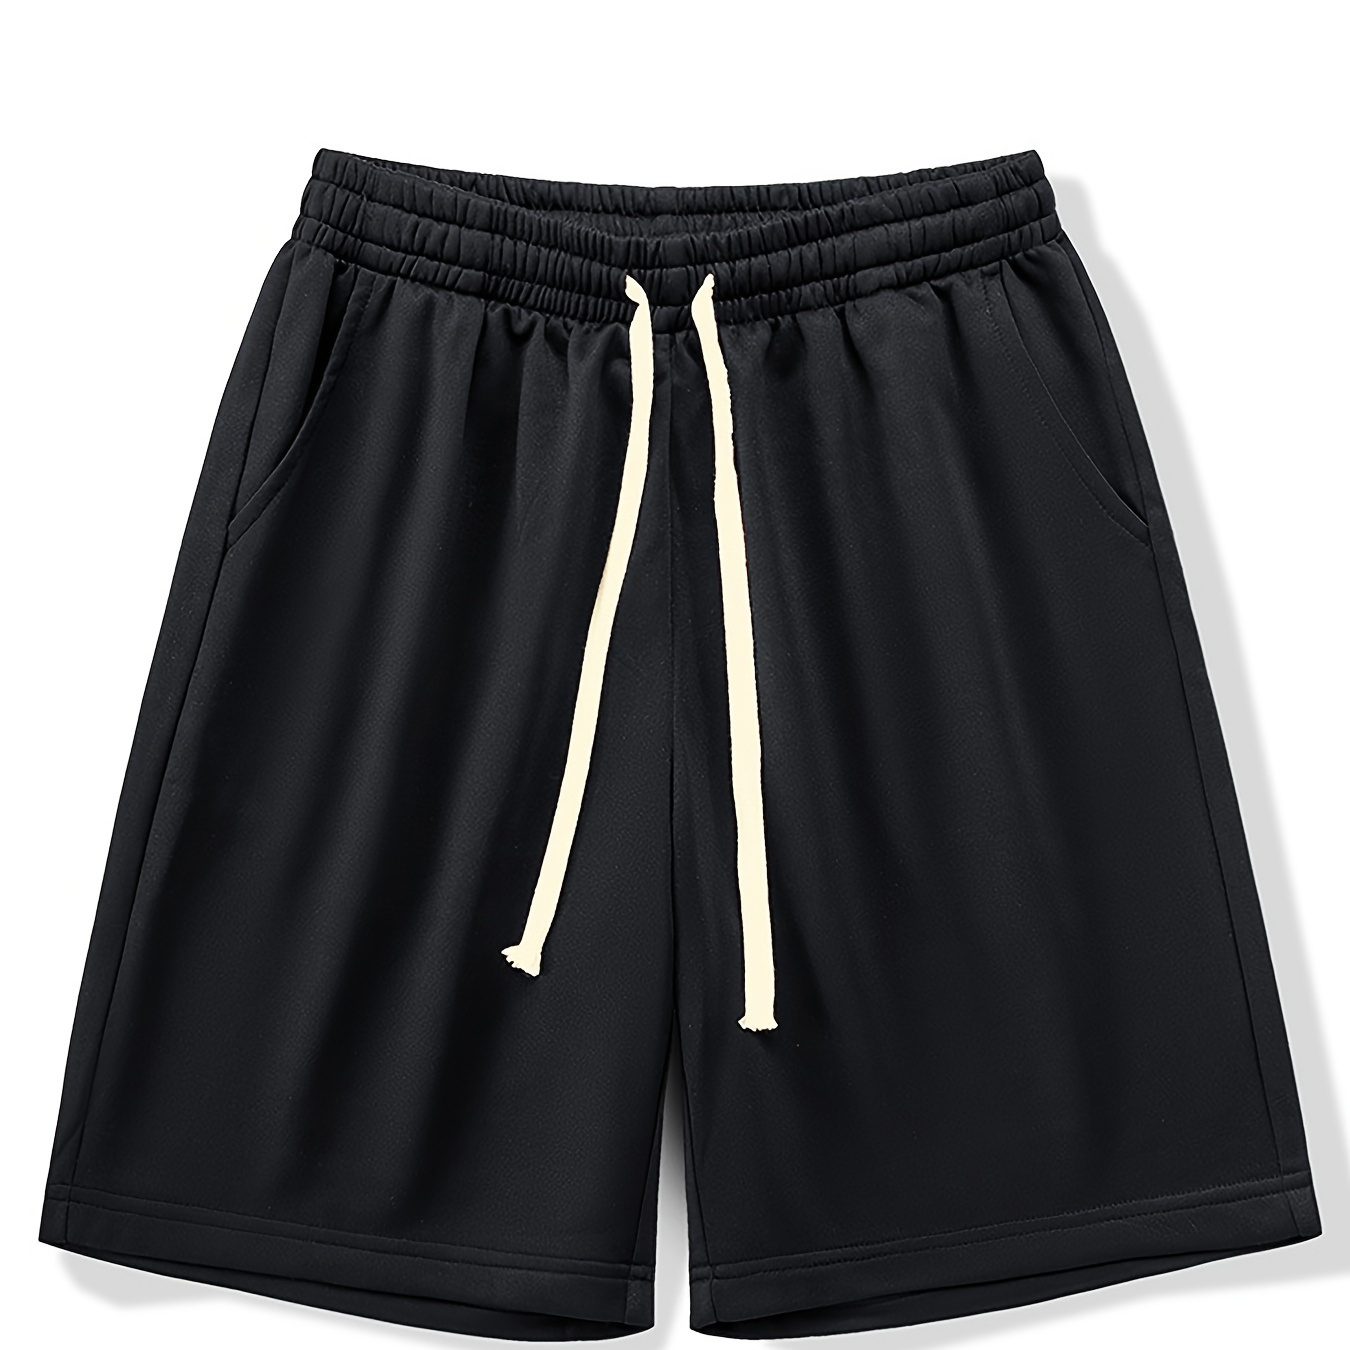 

Men's Solid Shorts With Contrast Color Drawstring And Pockets, Casual And Chic Shorts Suitable For Summer Home And Street Wear